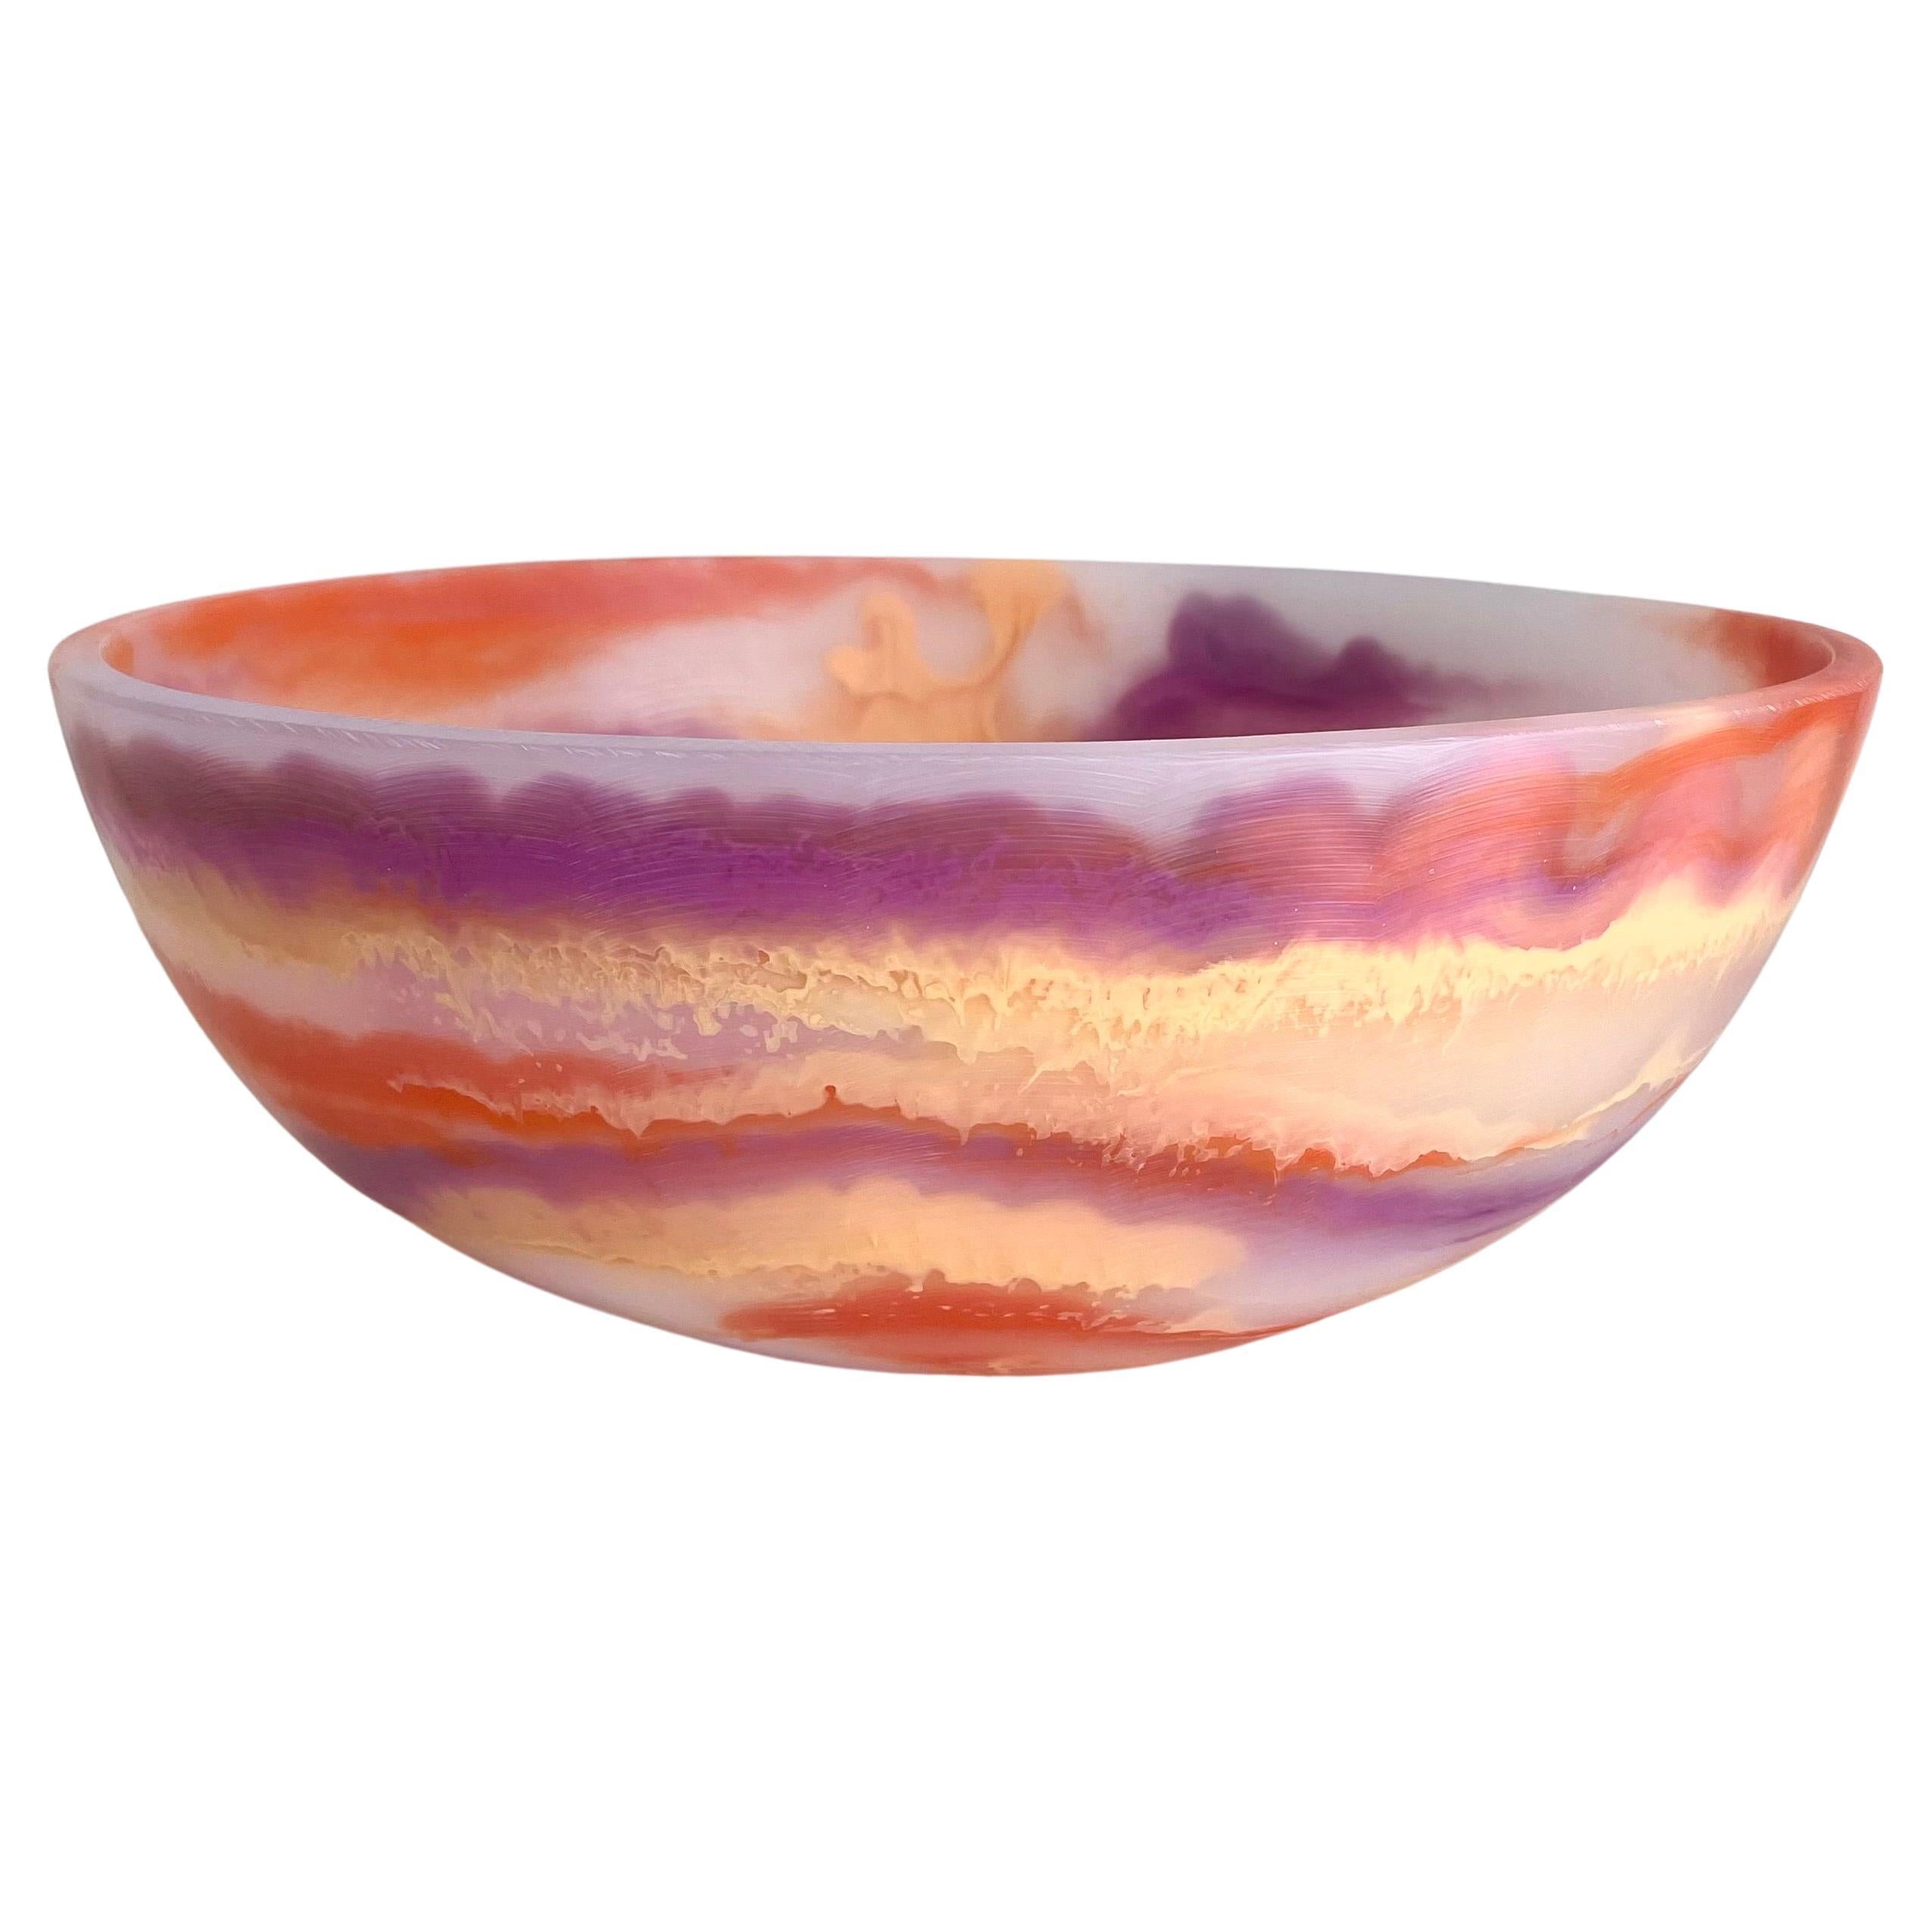 Medium Bowl in Orange and Purple Marbled Resin by Paola Valle For Sale